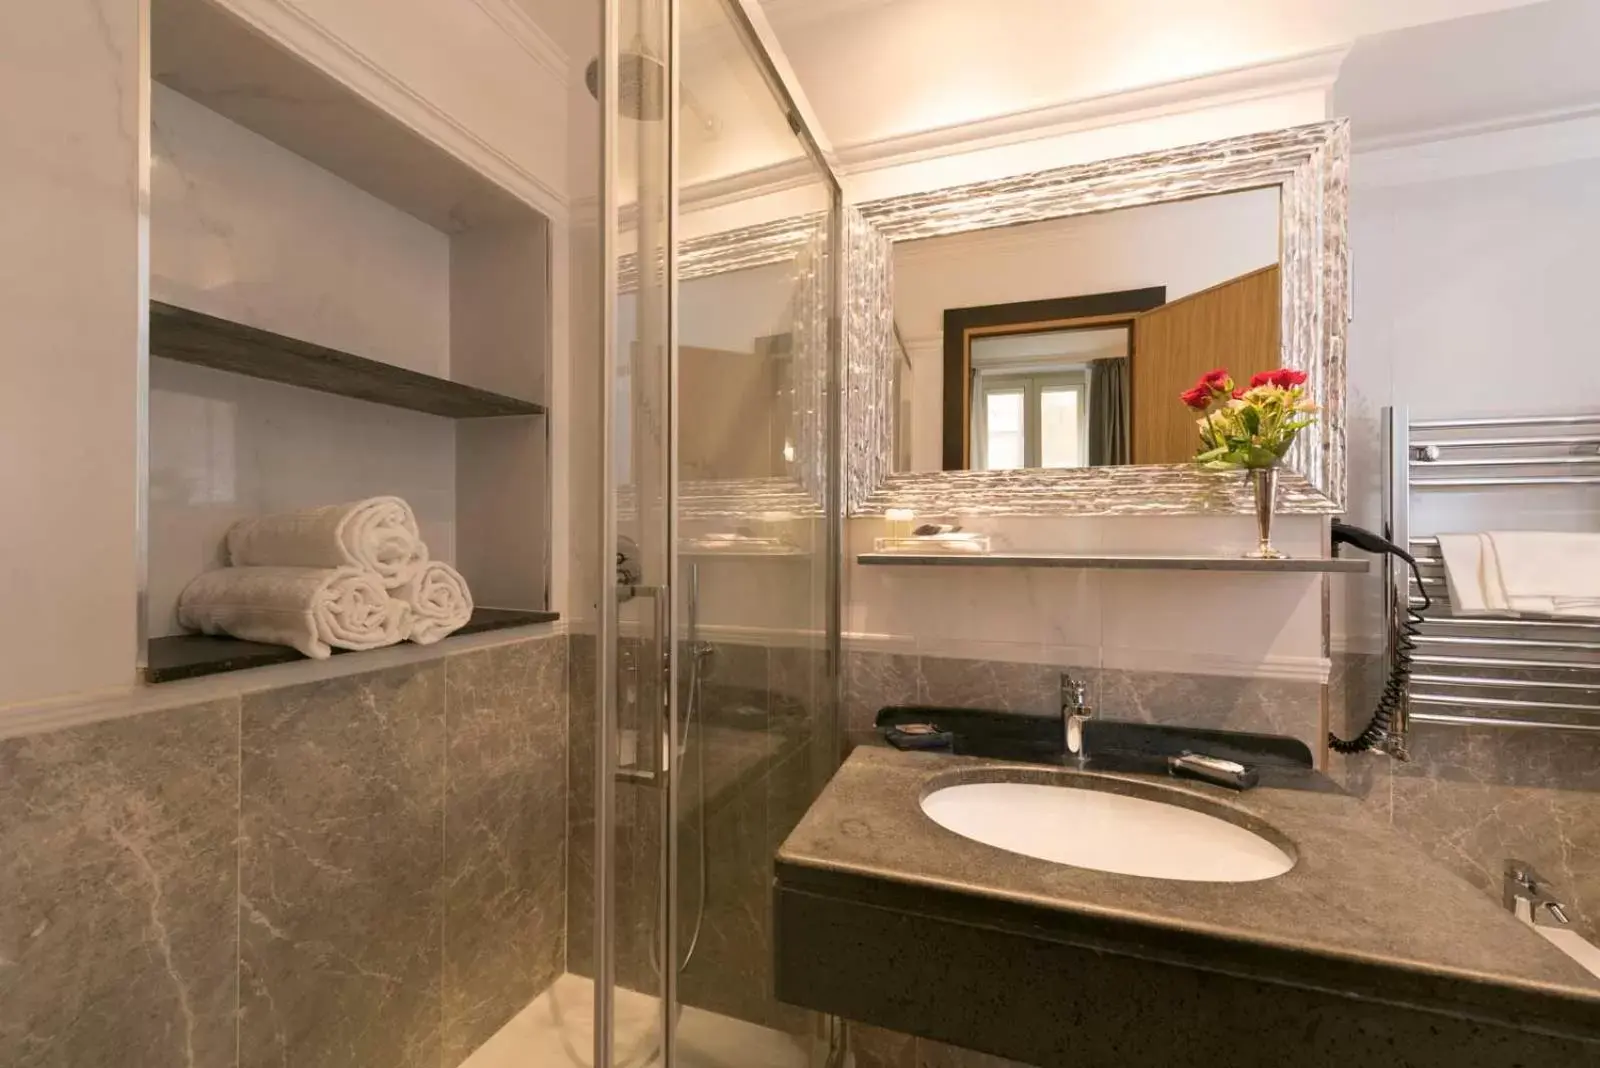 Bathroom in Duca d'Alba Hotel - Chateaux & Hotels Collection